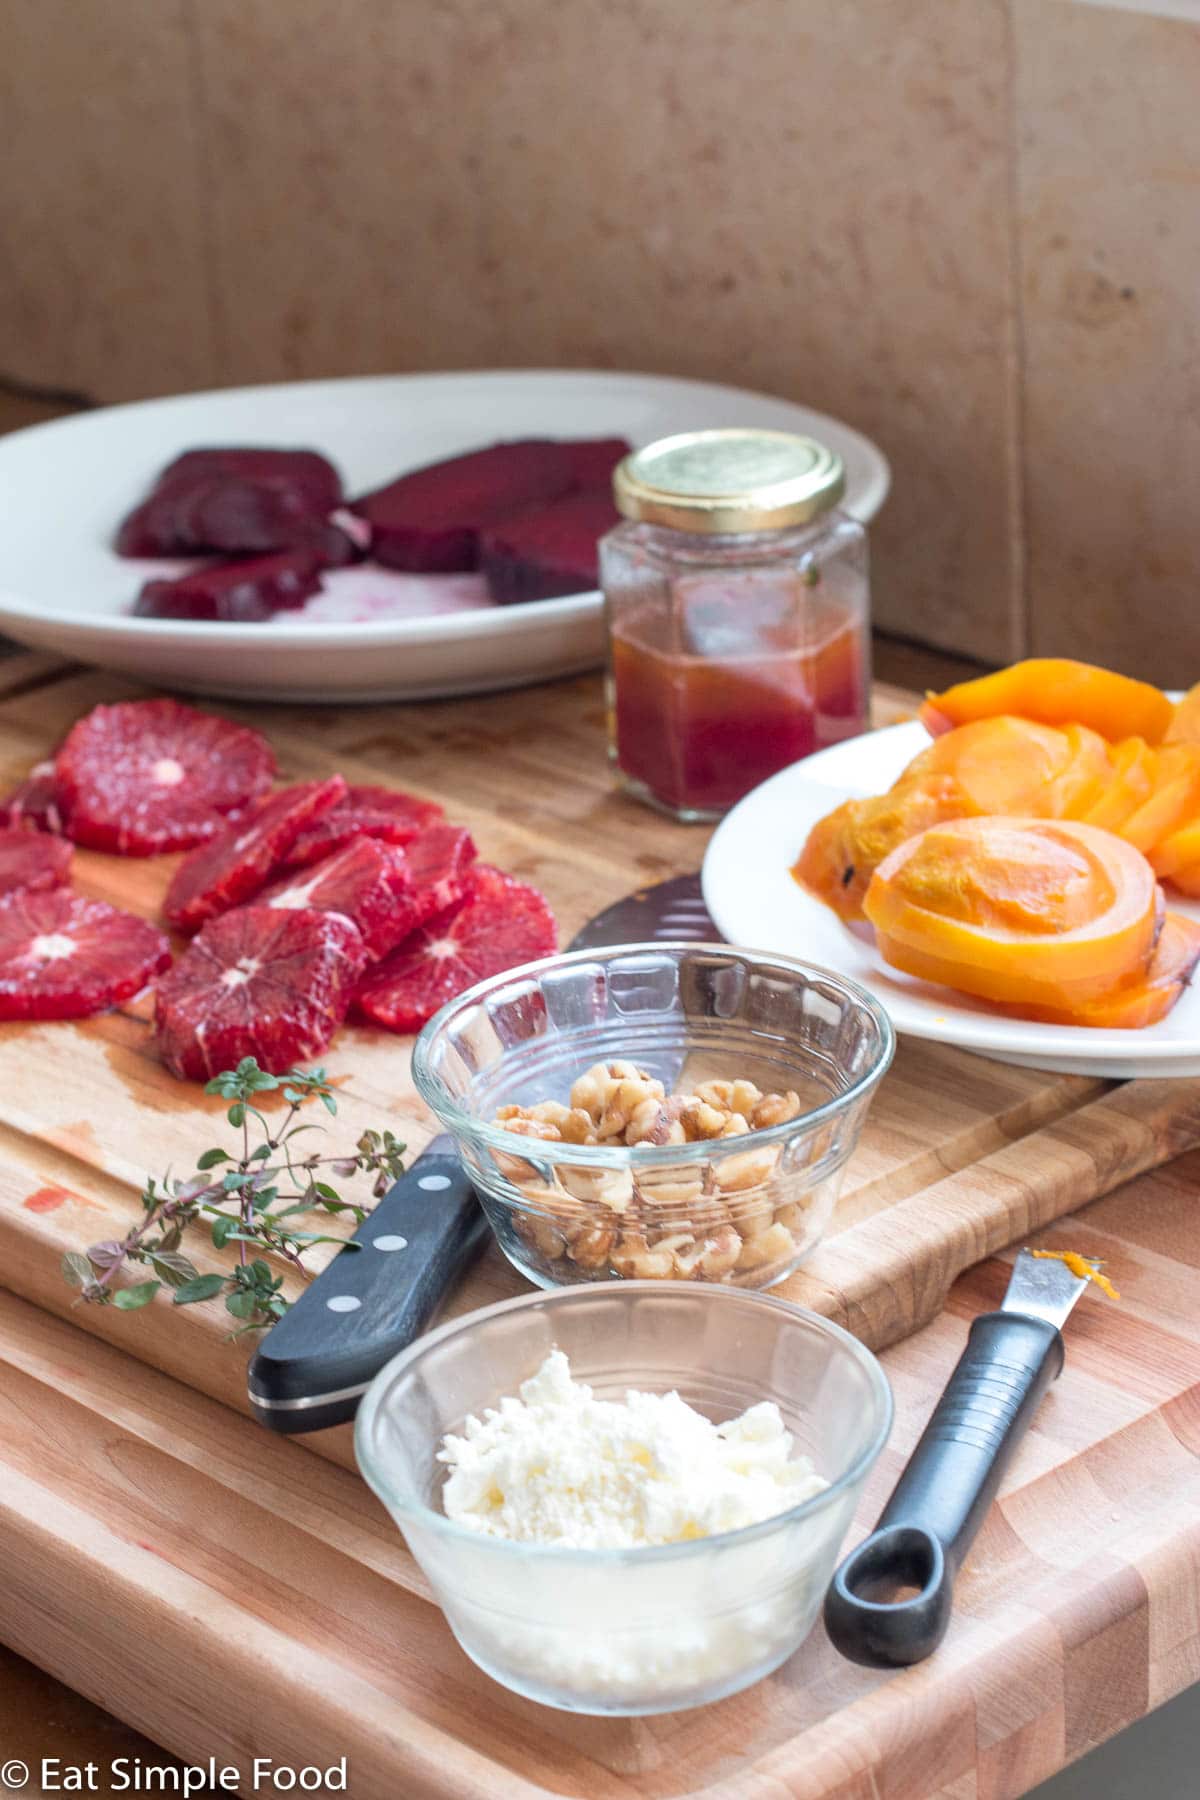 Ingredients on a wood cutting board: cooked sliced red beets, cooked sliced yellow beets, peeled sliced oranges, small cup of walnut pieces, small cup of goat cheese crumbles, sprigs of thyme, and a chef's knife.